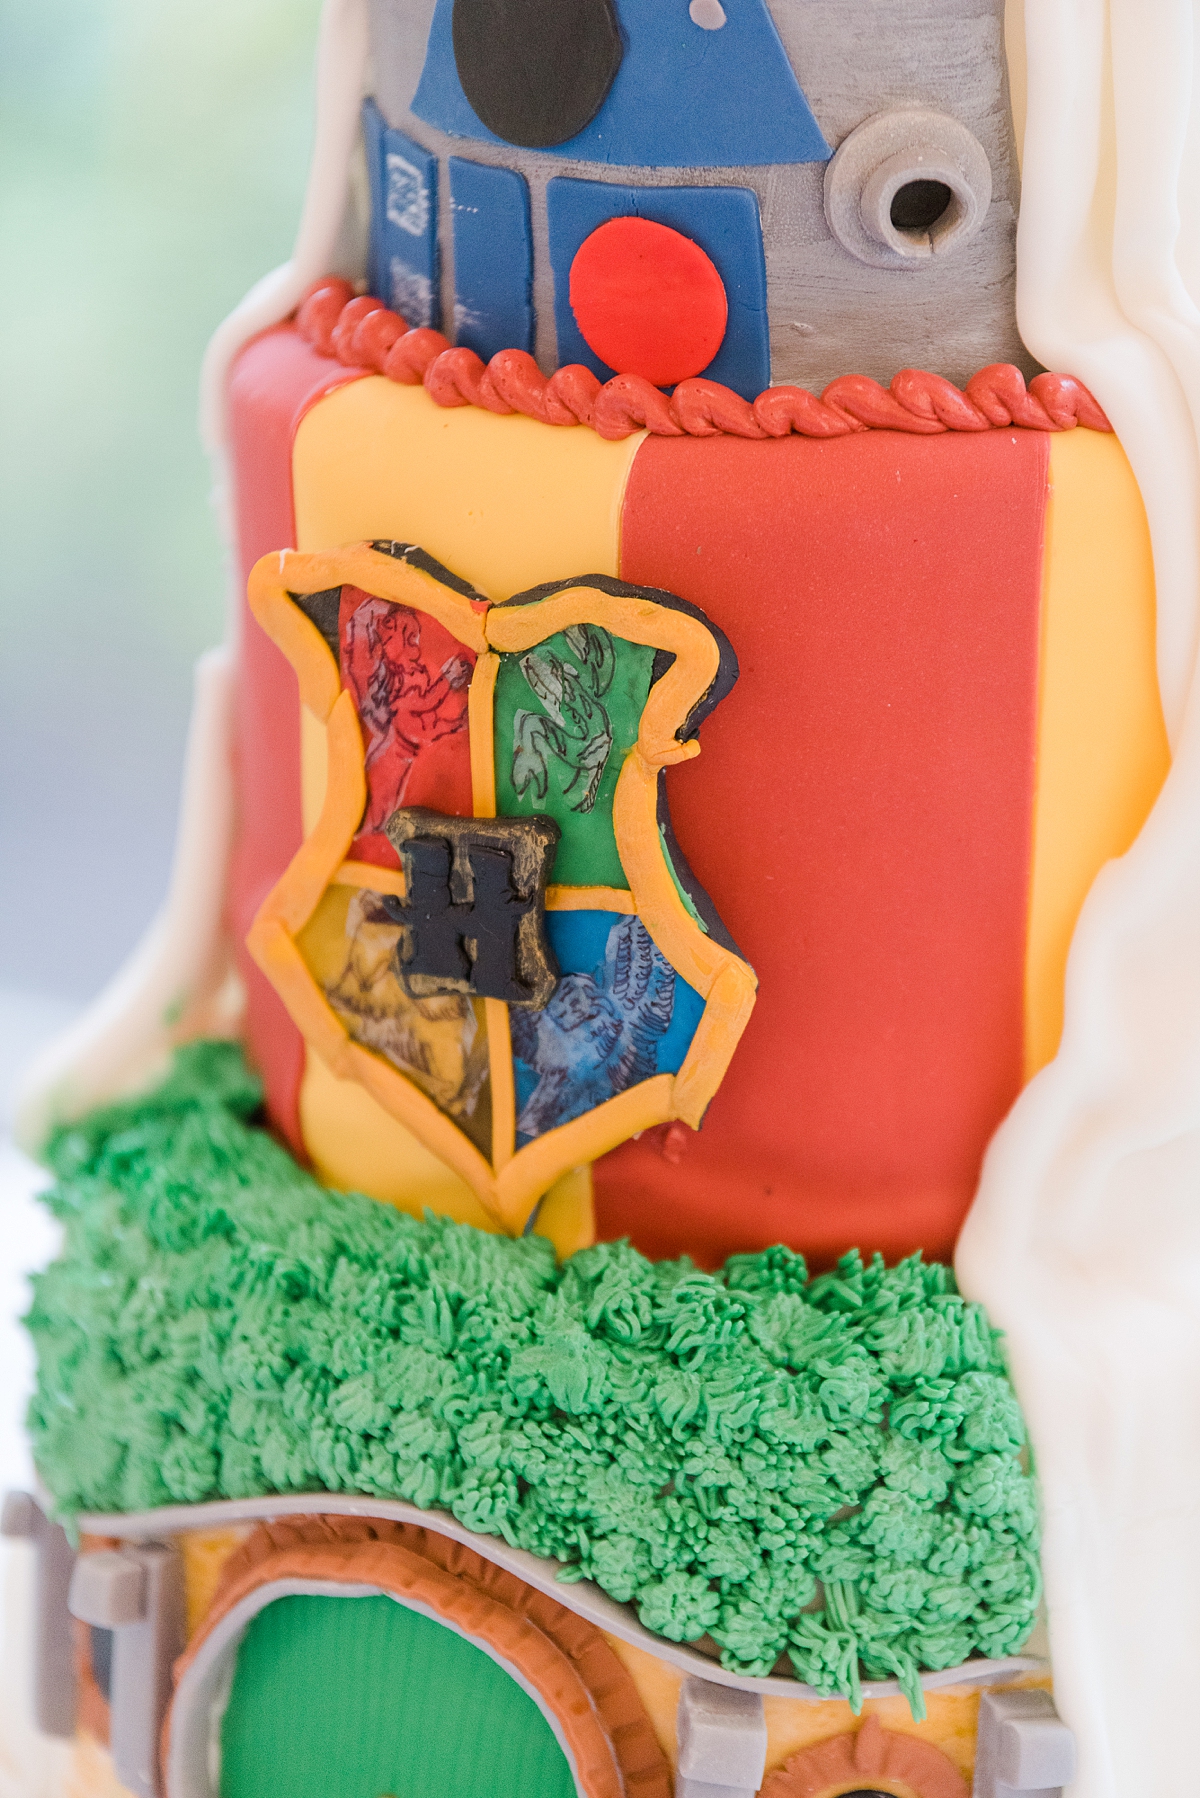 Fandom Wedding Cake Featuring Harry Potter, Star Wars, and Lord of the Rings Wedding Cake at Virginia Cliffe Inn Wedding Reception. Wedding Cake by Copy Cat Cakes, Wedding Photography by Richmond Wedding Photographer Kailey Brianne Photography. 